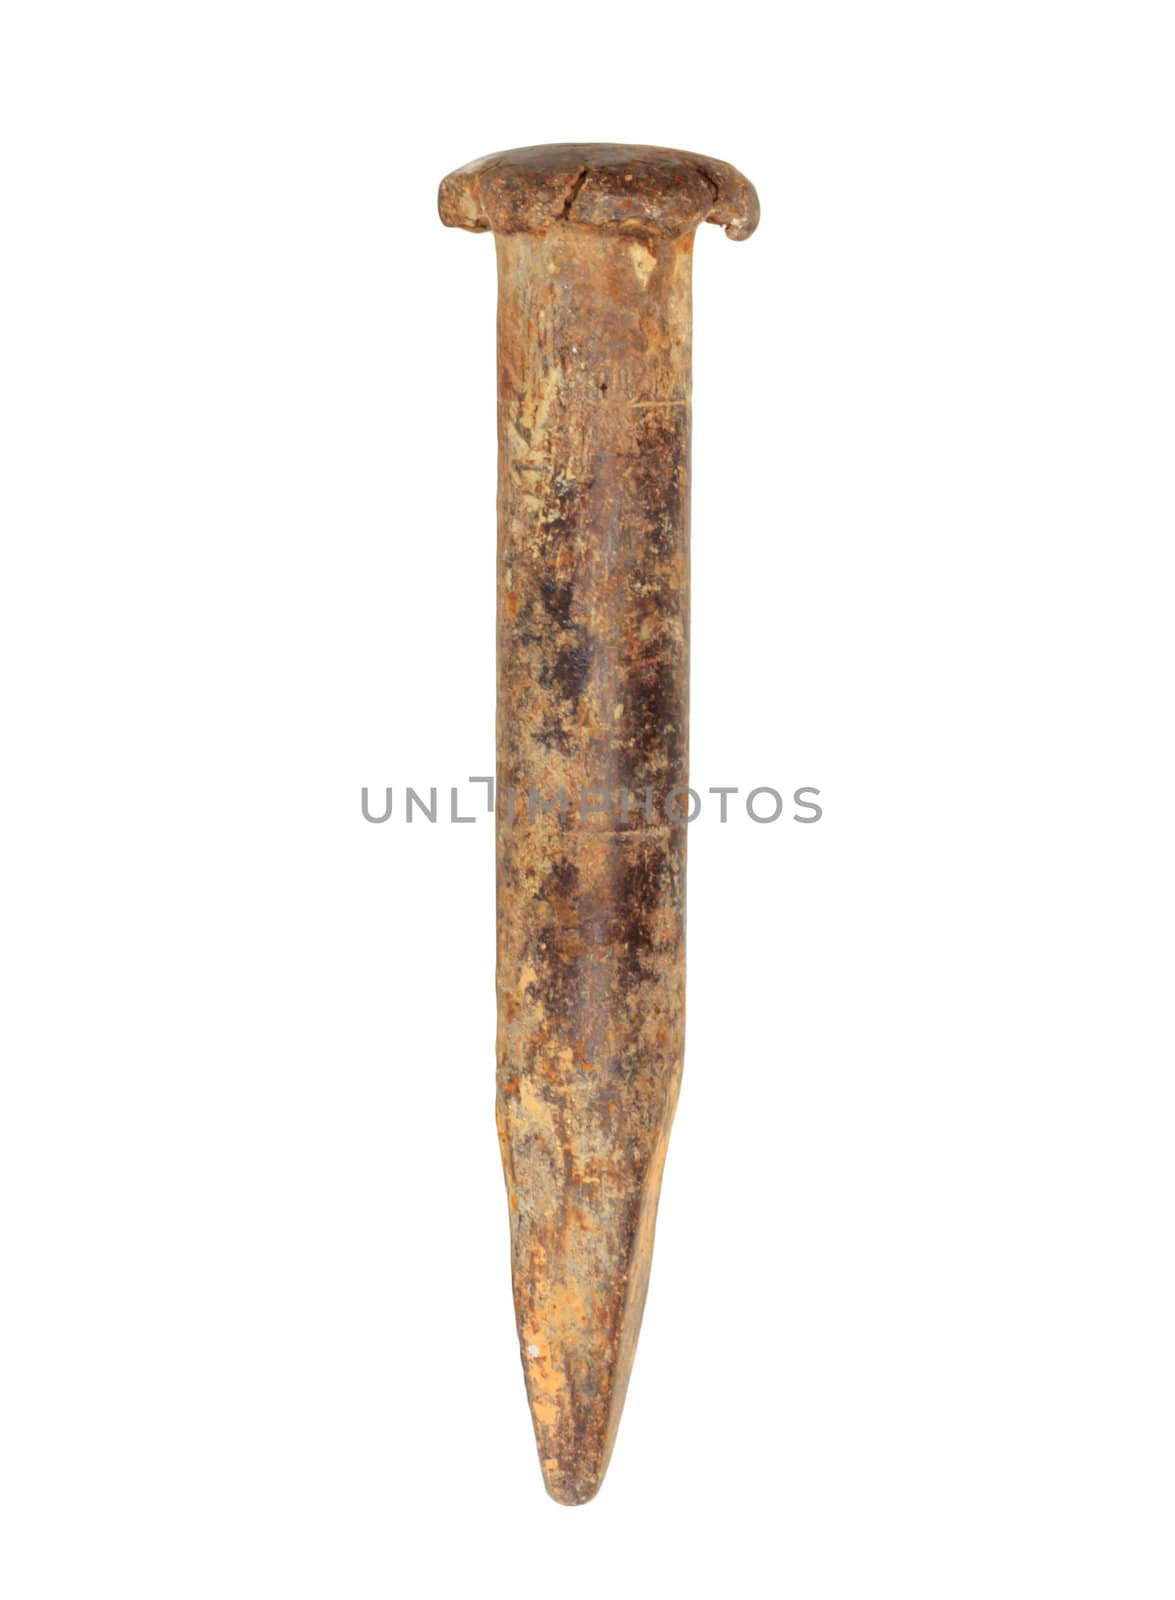 Old rusty nail on a white background  by schankz